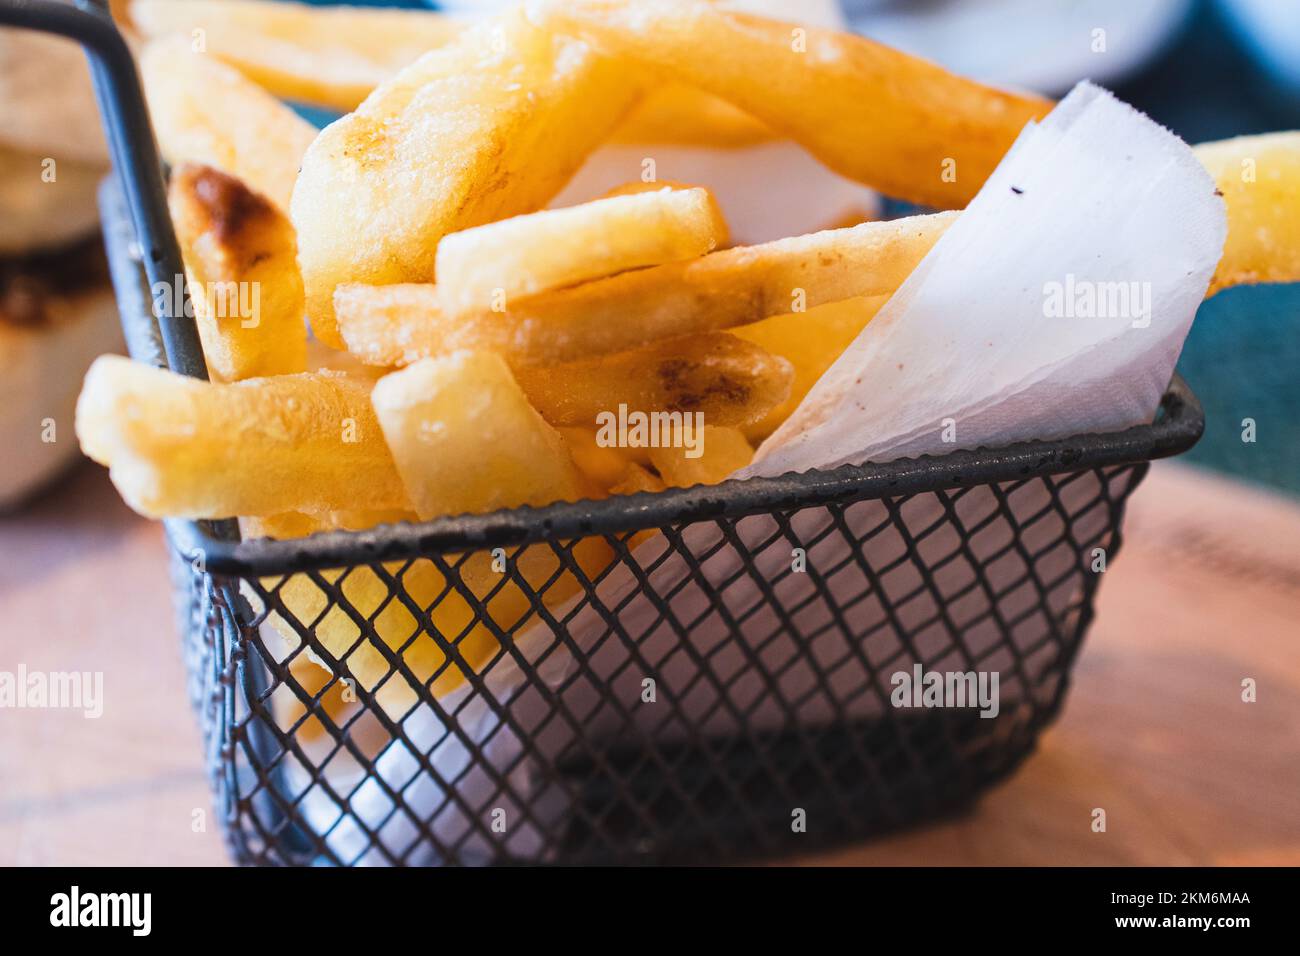 Close up on metal basket filled with yummy French fires, or fried potatoes. Stock Photo